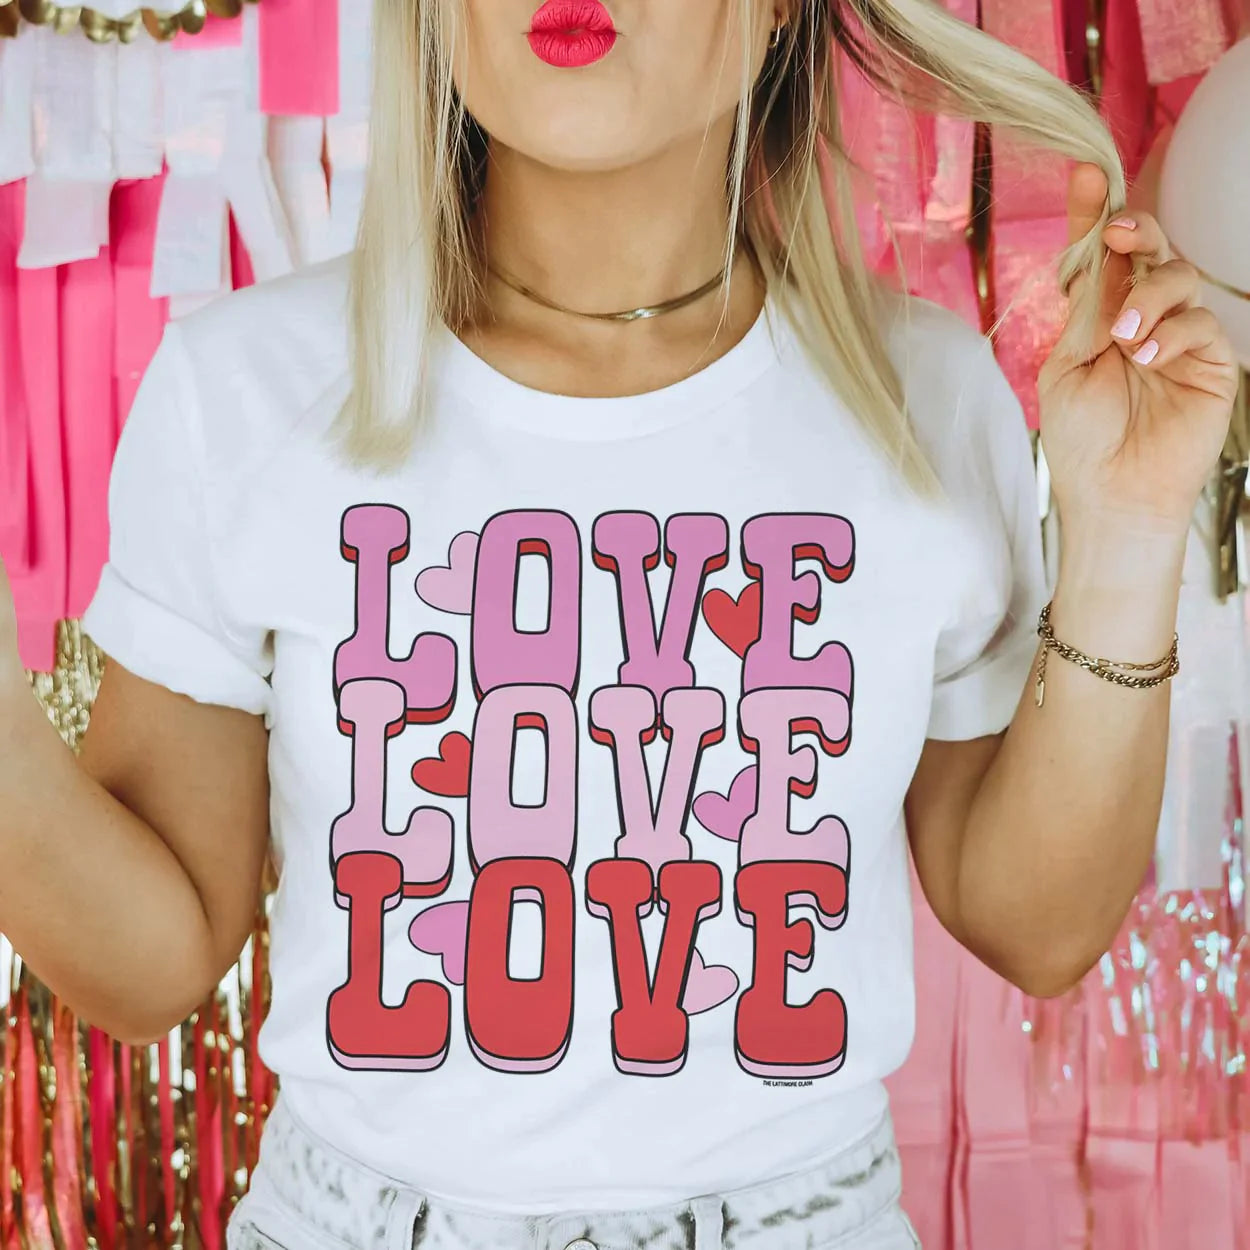 This crew neck, short sleeve white tee is being modeled with rolled sleeves and light wash denim jeans. The graphic says "love love love" in hot pink, light pink, and red colored bubble font, stacked on top of one another with hearts throughout. 